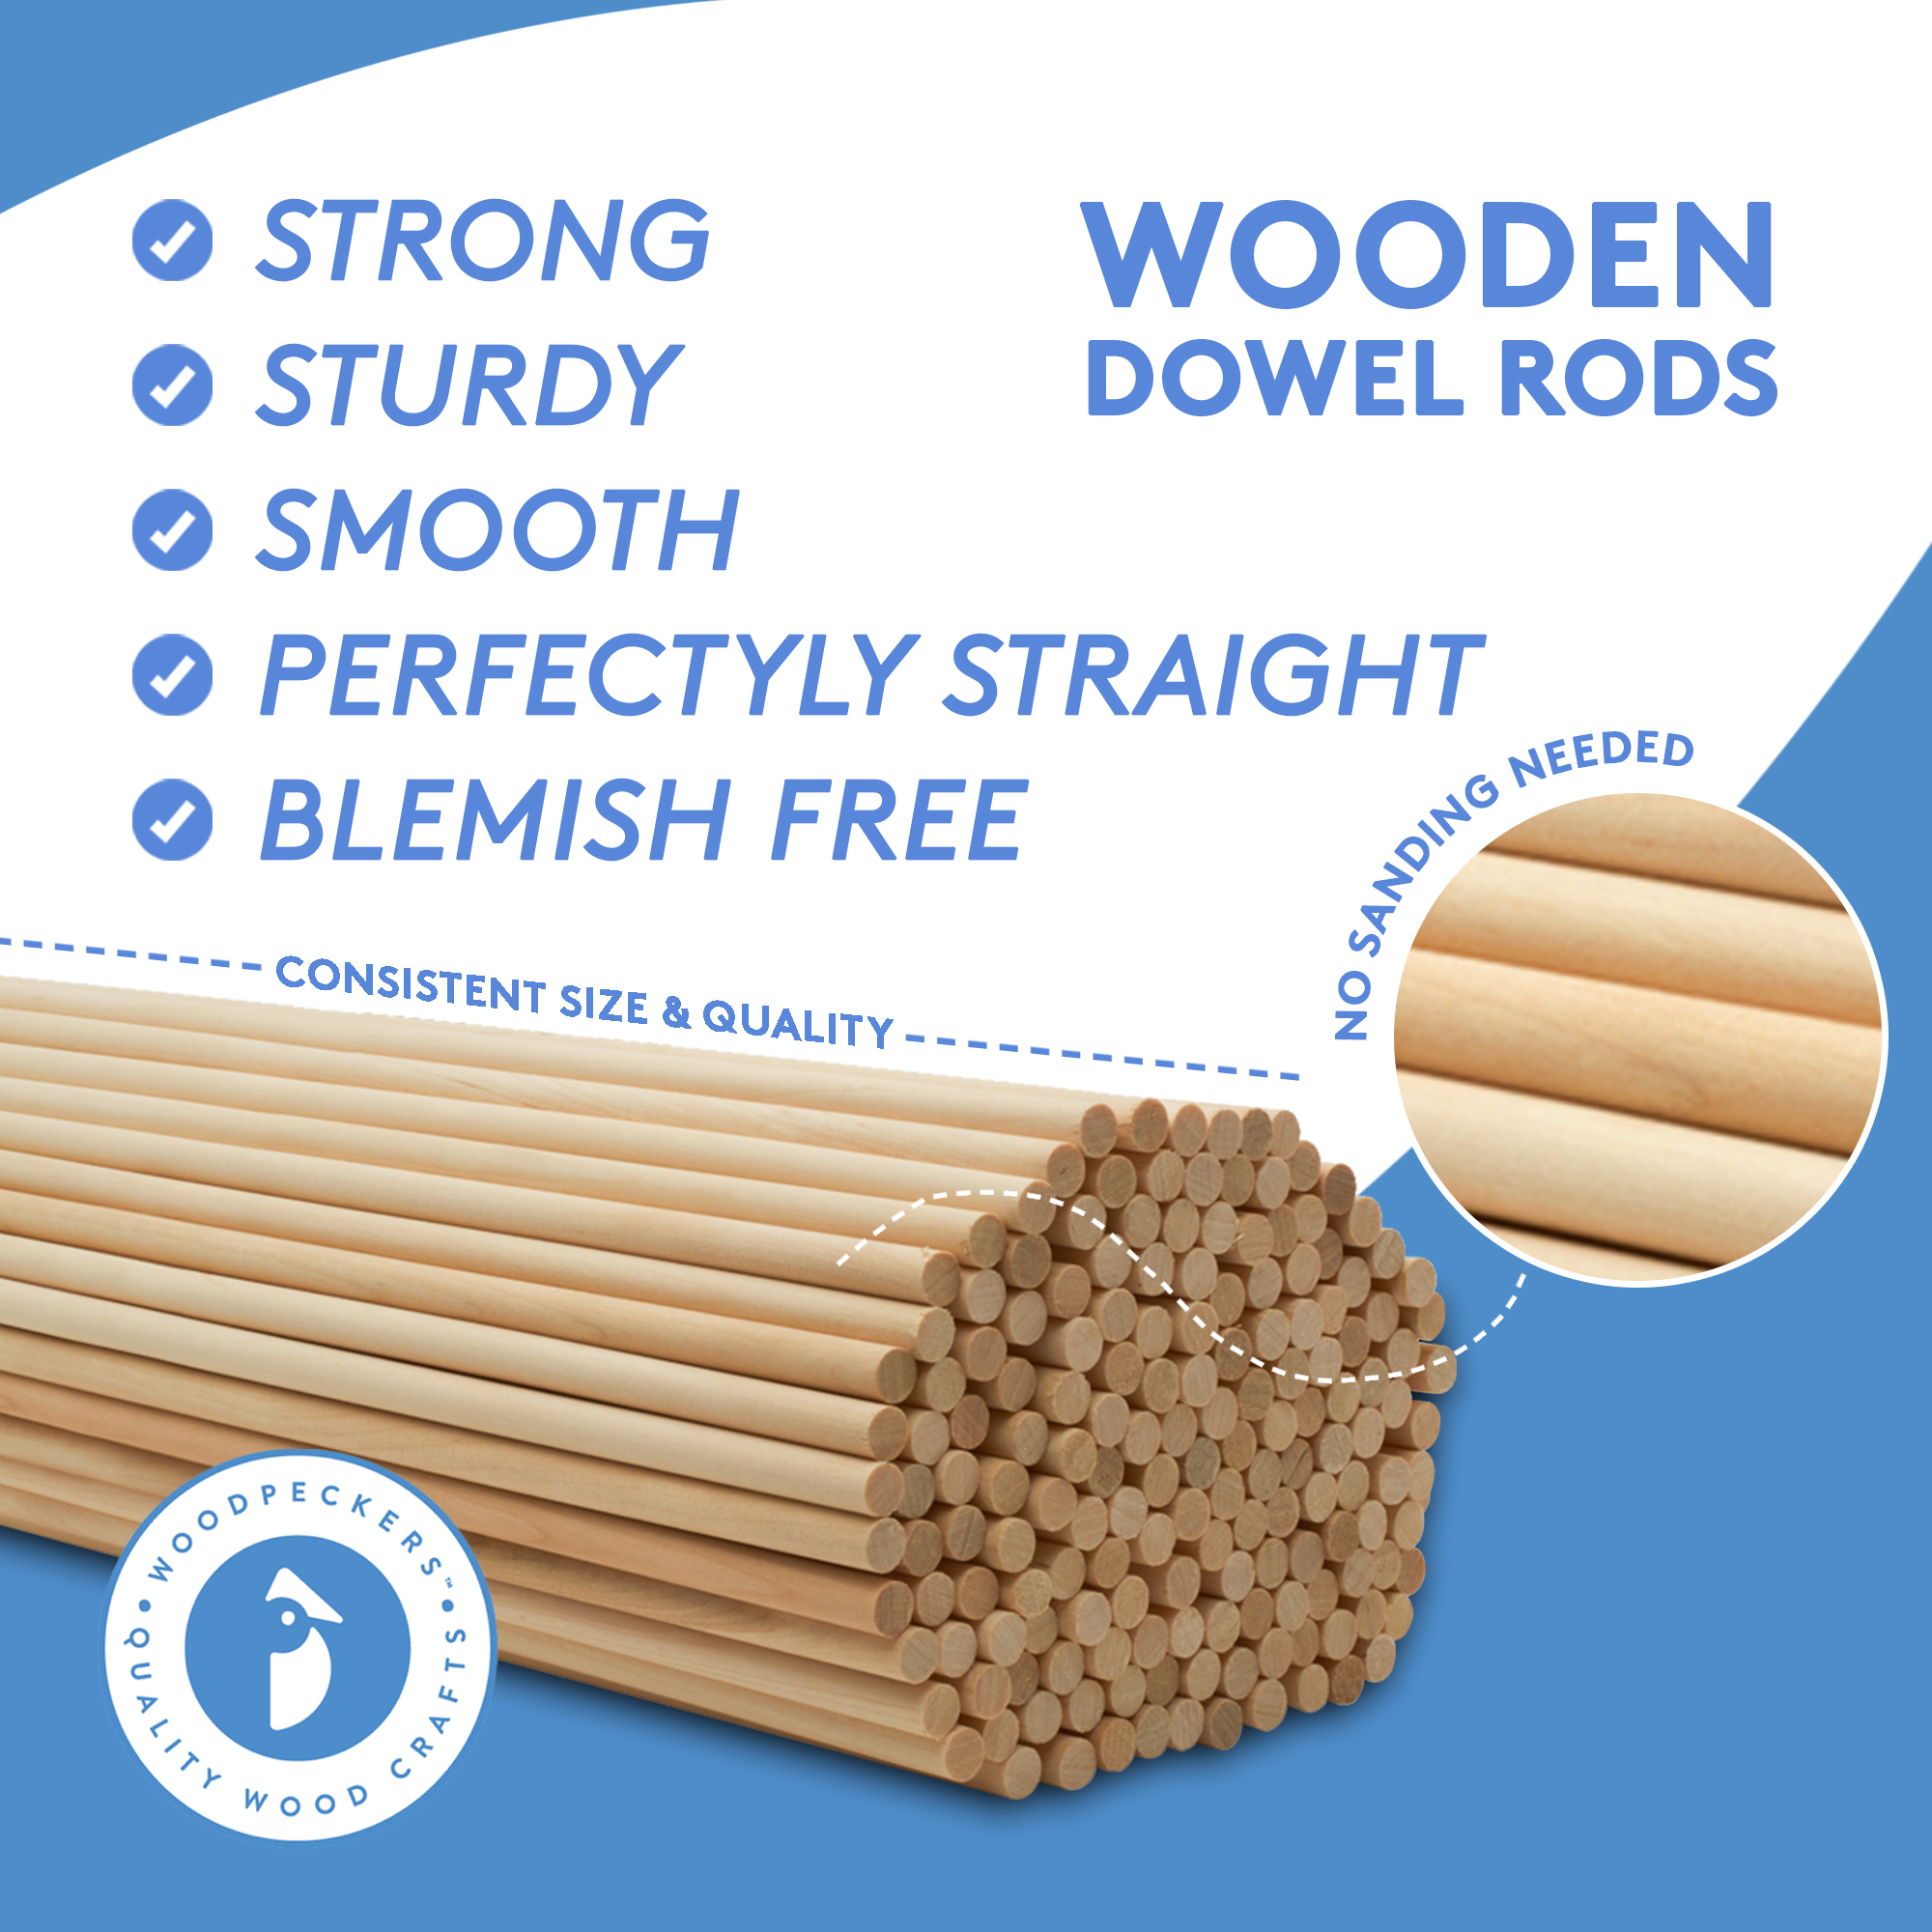 Woodpeckers 3/8 inch x 48 inch Wooden Dowel Rods - Unfinished Hardwood Dowels for Crafts & Woodworking (5)